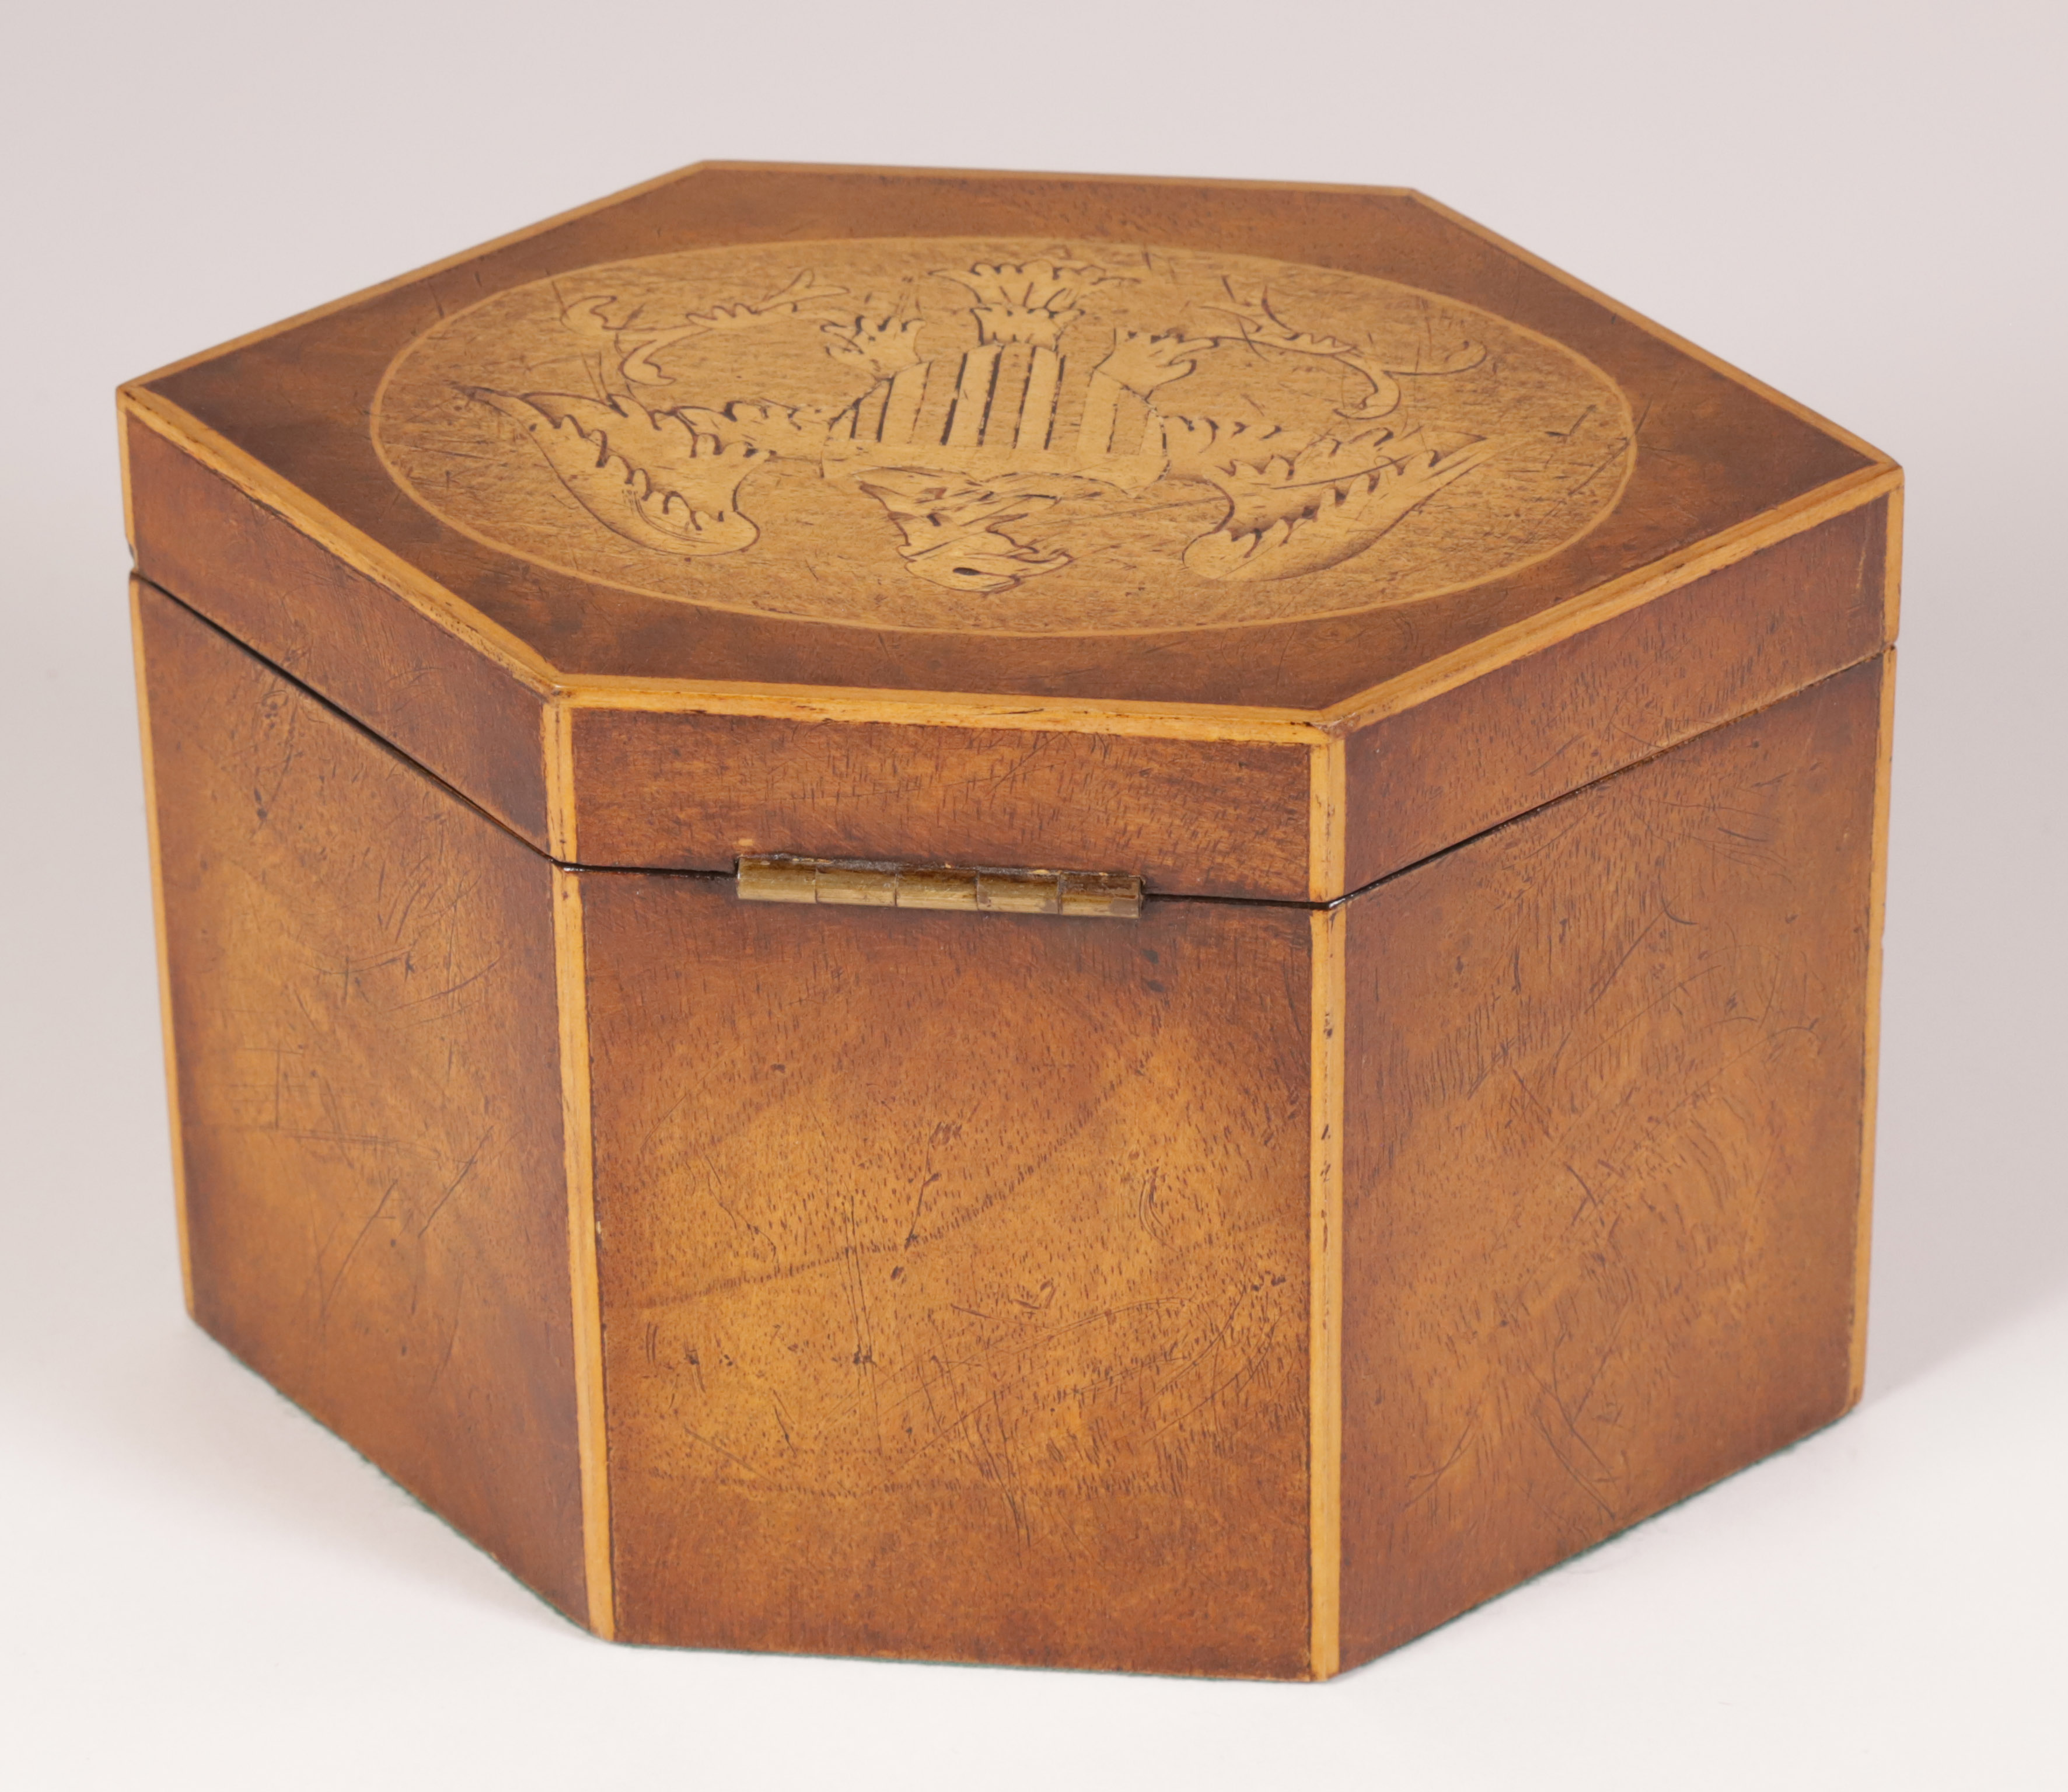 Contemporary Federal Style Eagle Inlaid Canted Hexagonal Tea Caddy with Two Lidded Compartments